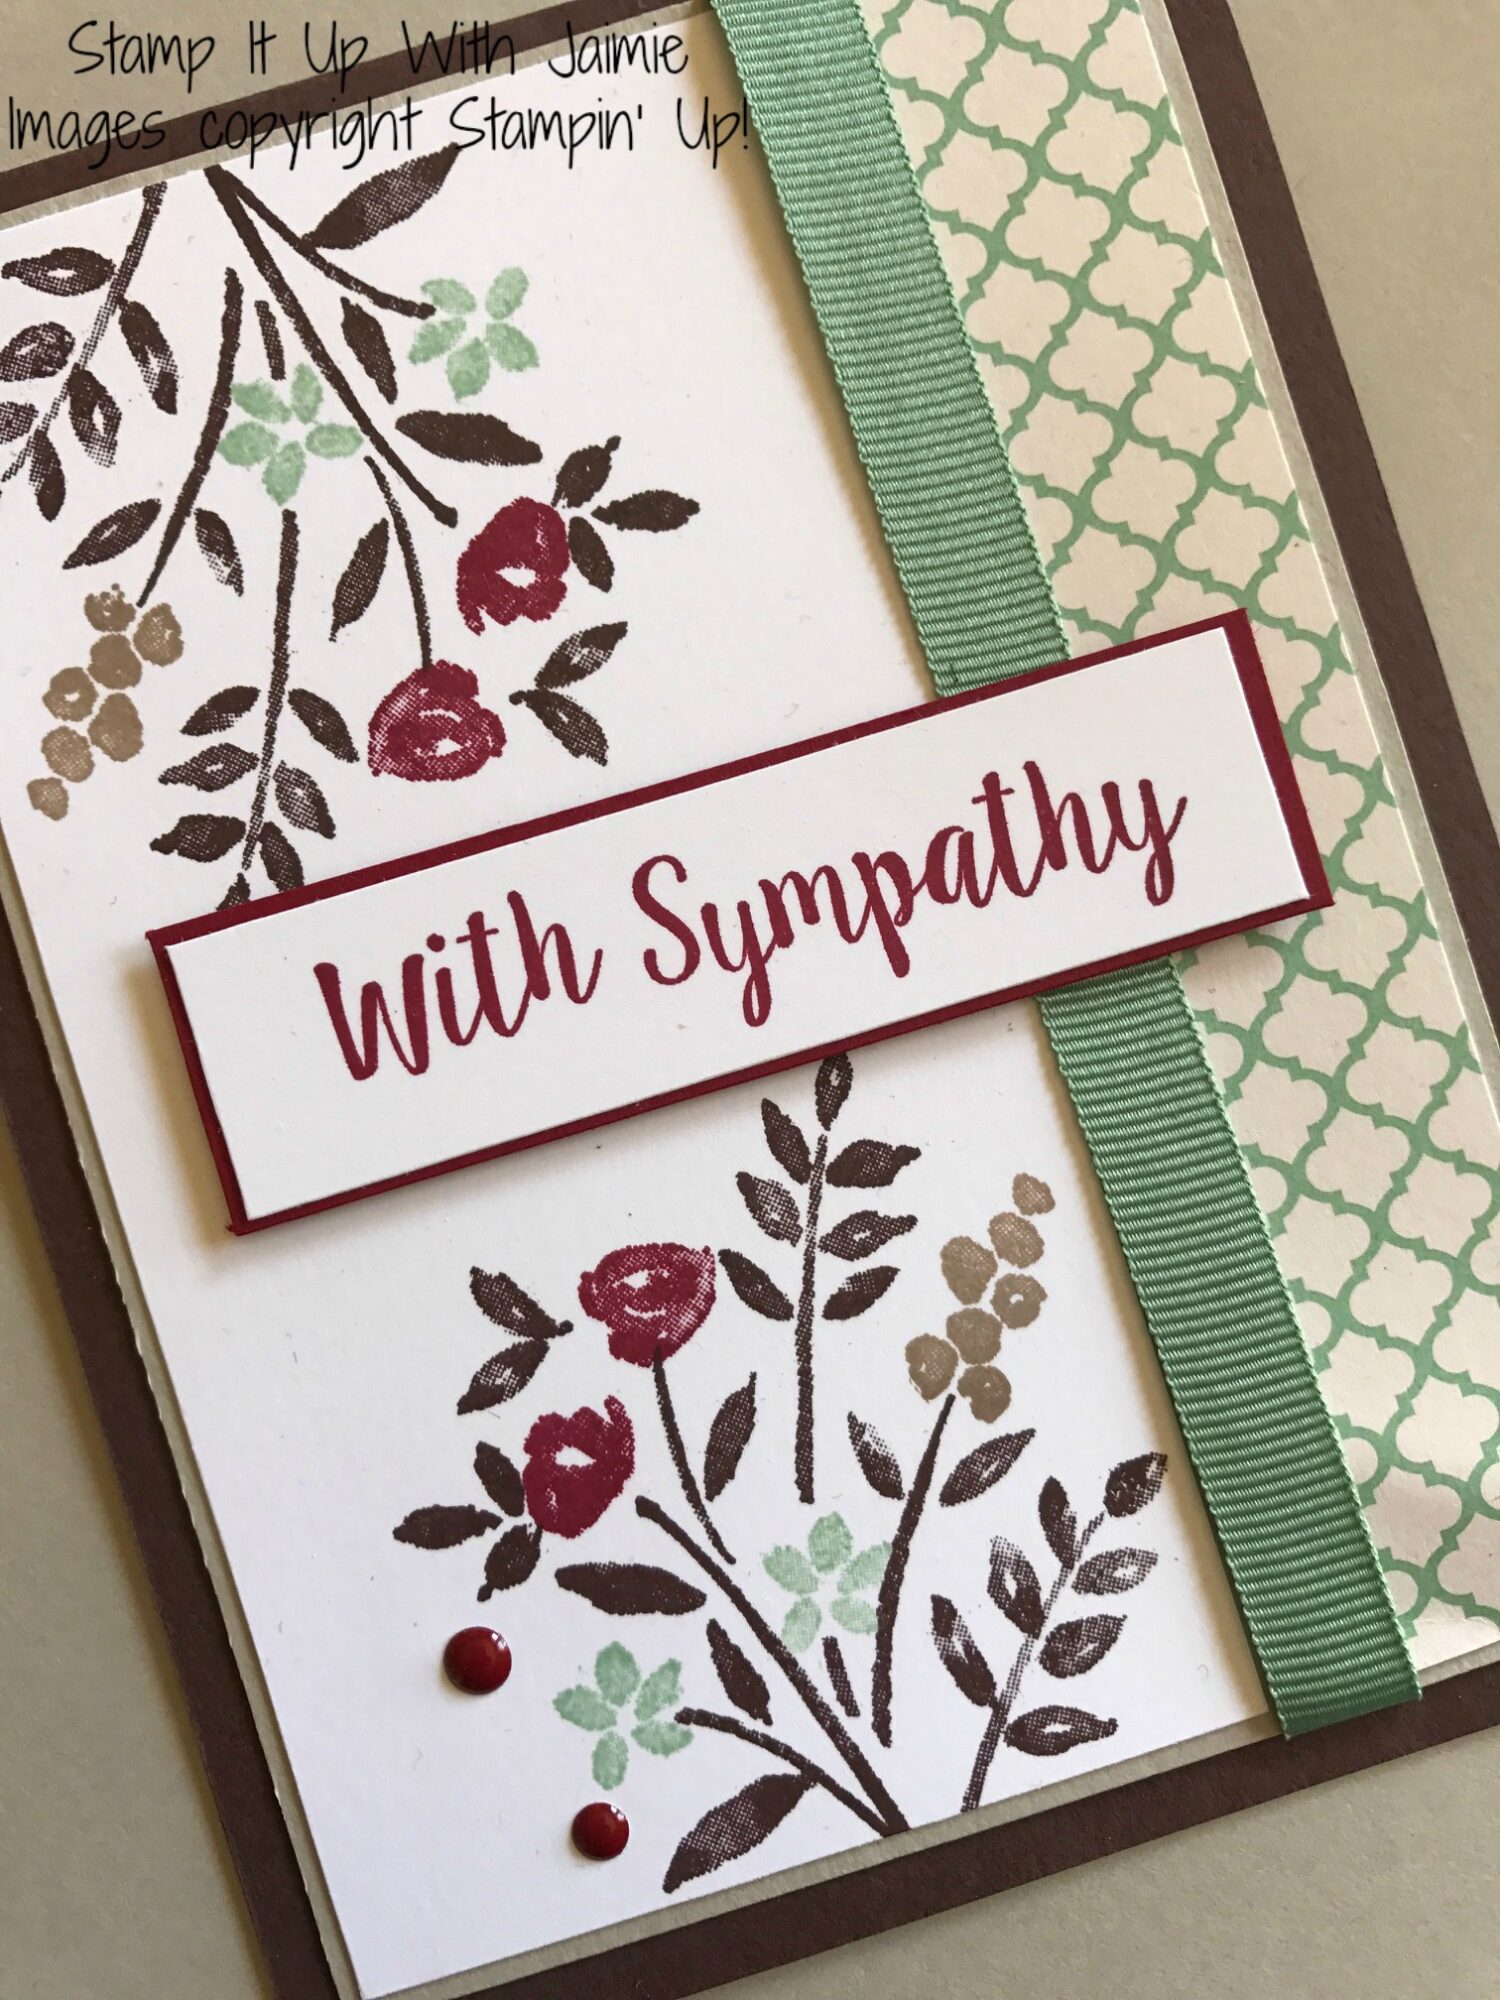 sympathy-stamp-it-up-with-jaimie-stampin-up